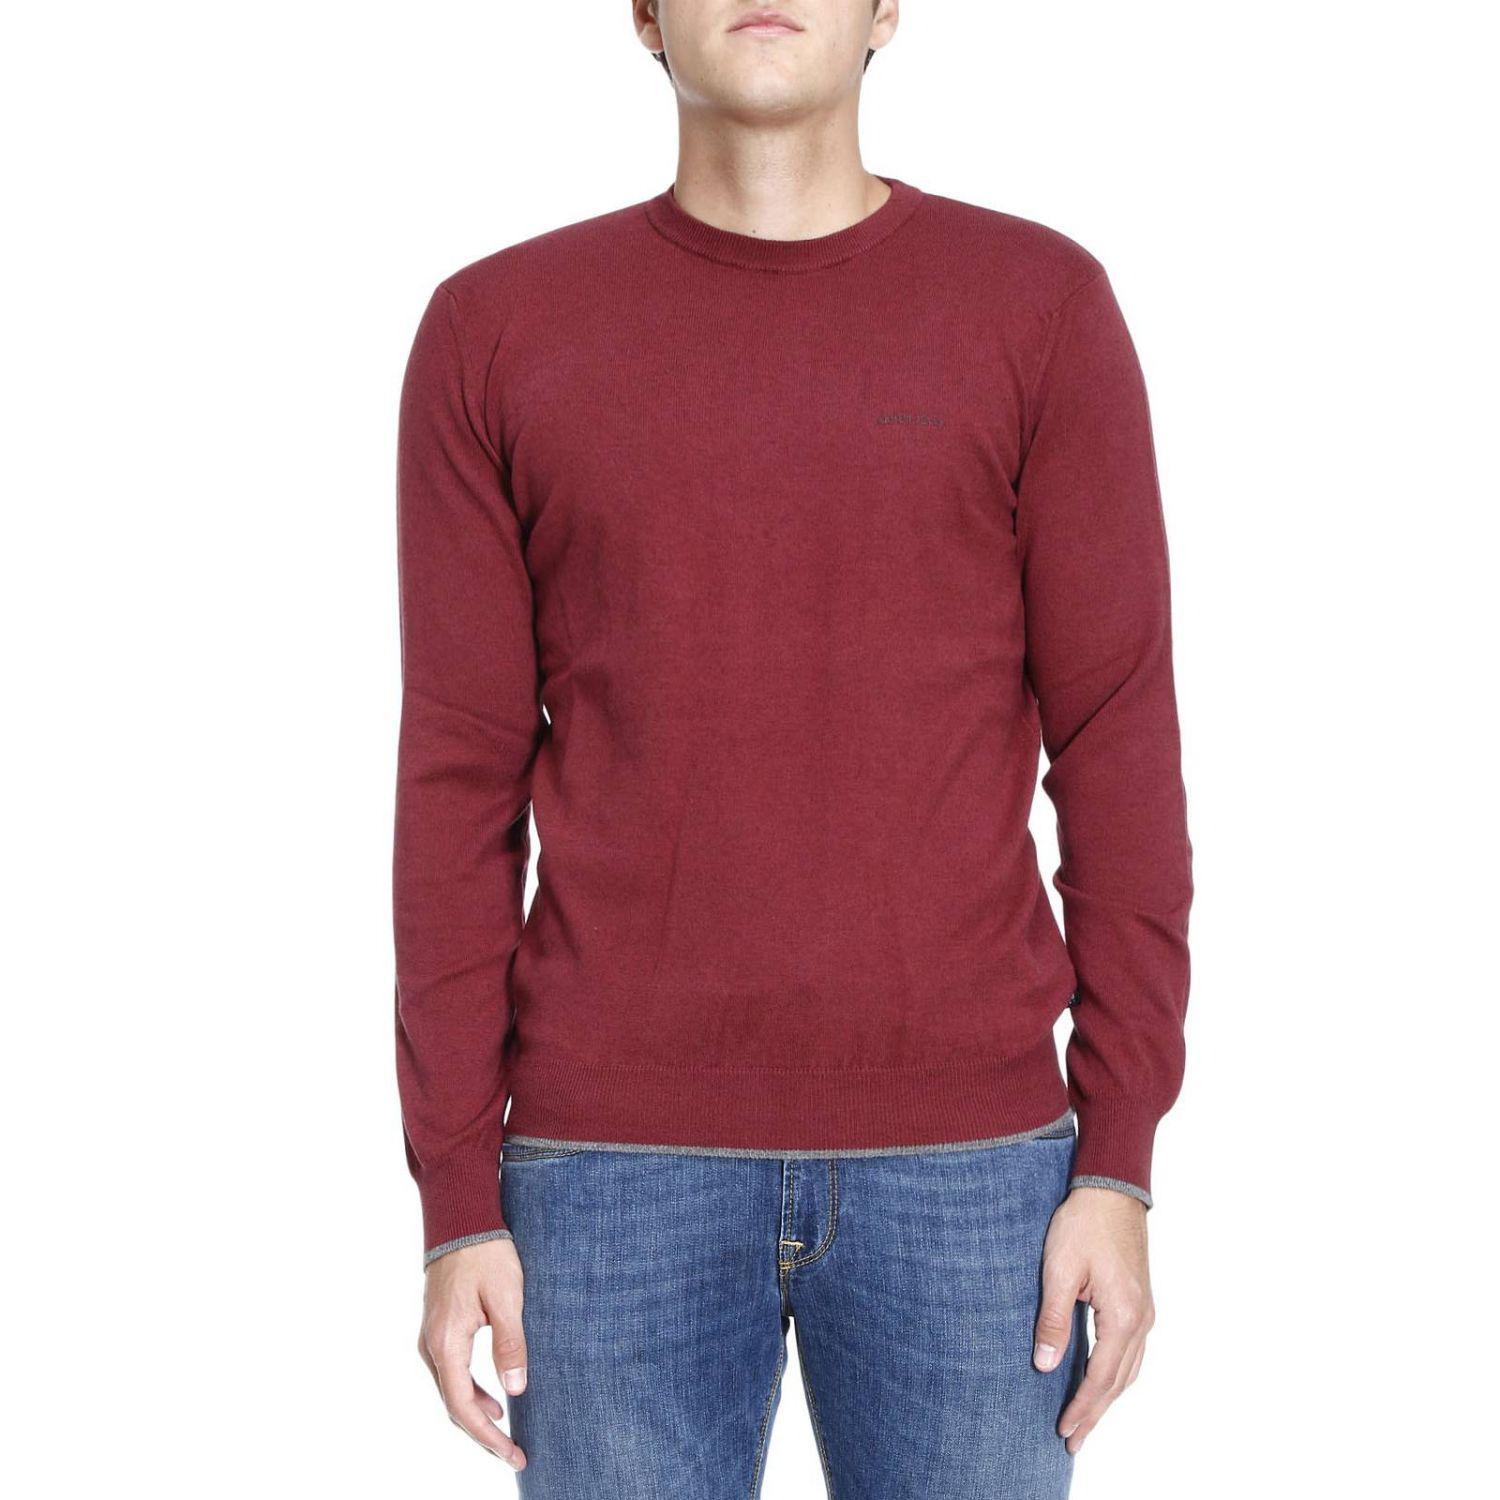 Lyst - Armani Jeans Sweater Men in Red for Men